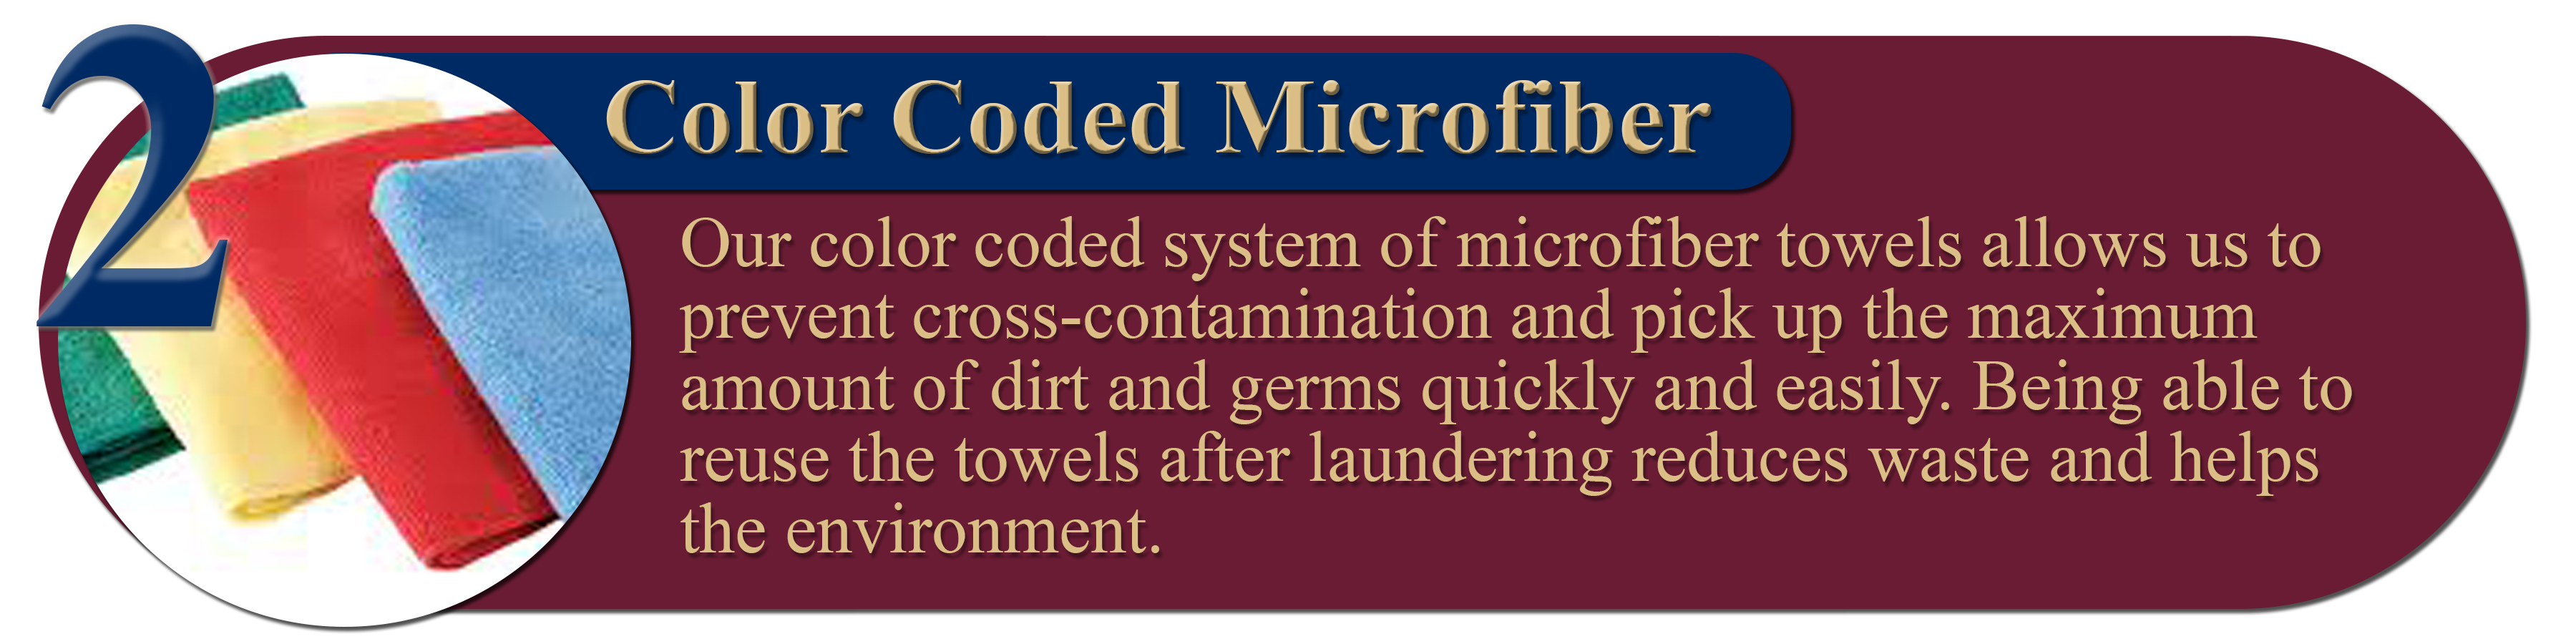 2. Color Coded Microfiber: Our color coded system of microfiber towels allows us to prevent cross-contamination and pick up the maximum amount of dirt and germs quickly and easily. Being able to reuse the towels after laundering reduces waste and helps the environment.